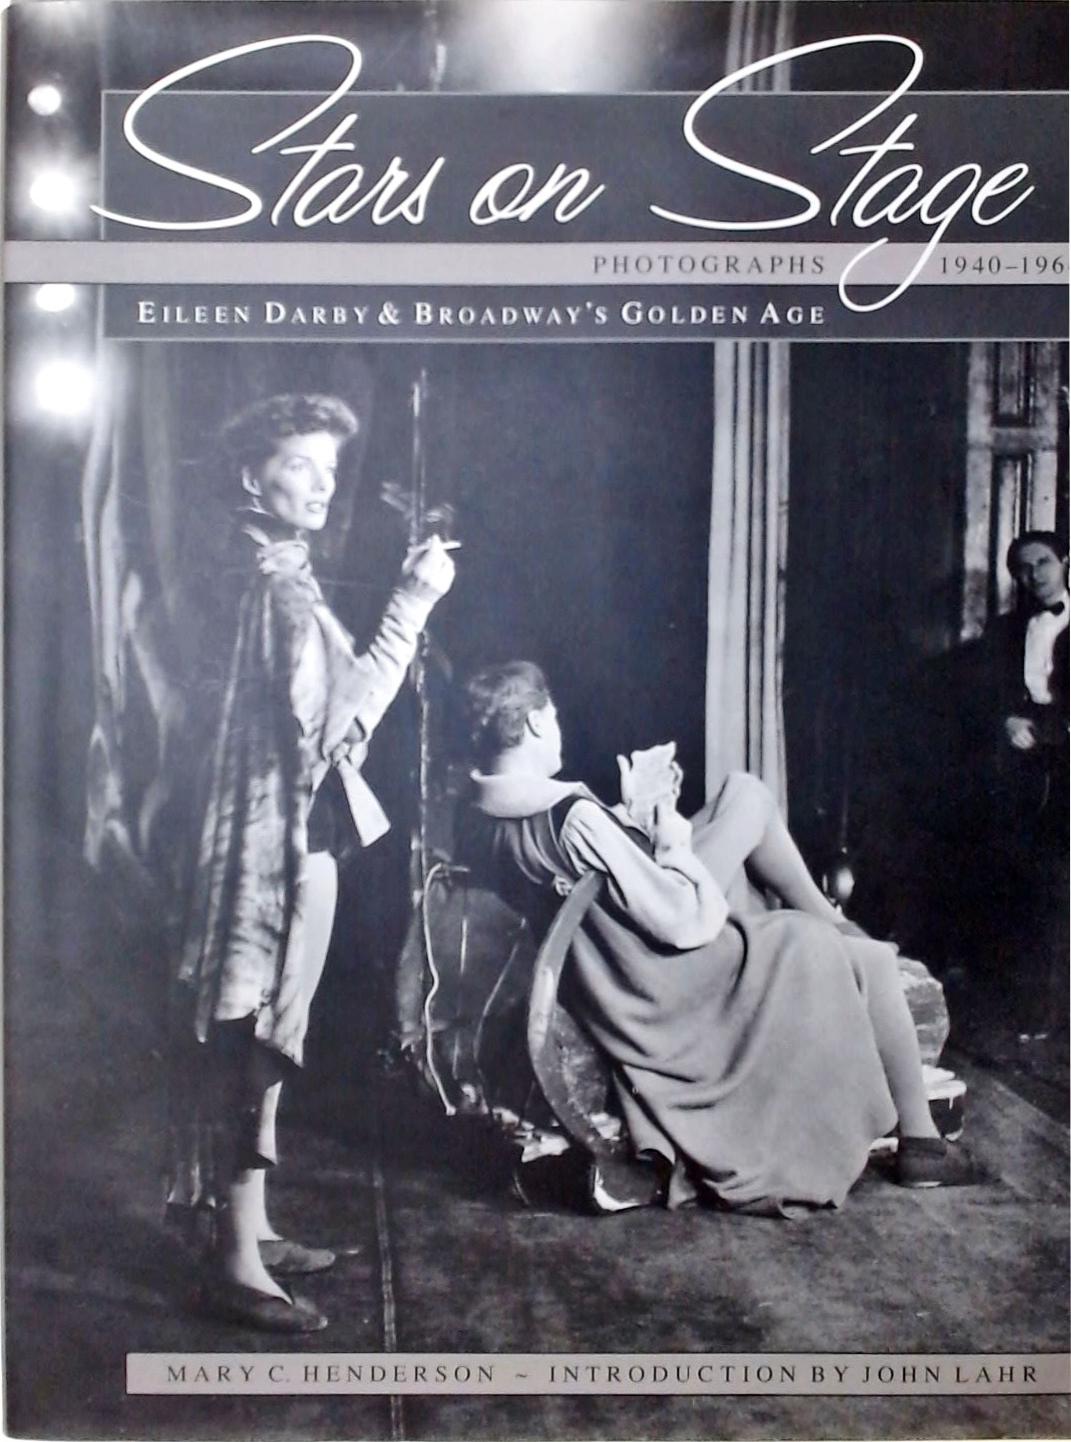 Stars On Stage - Broadway's Golden Age